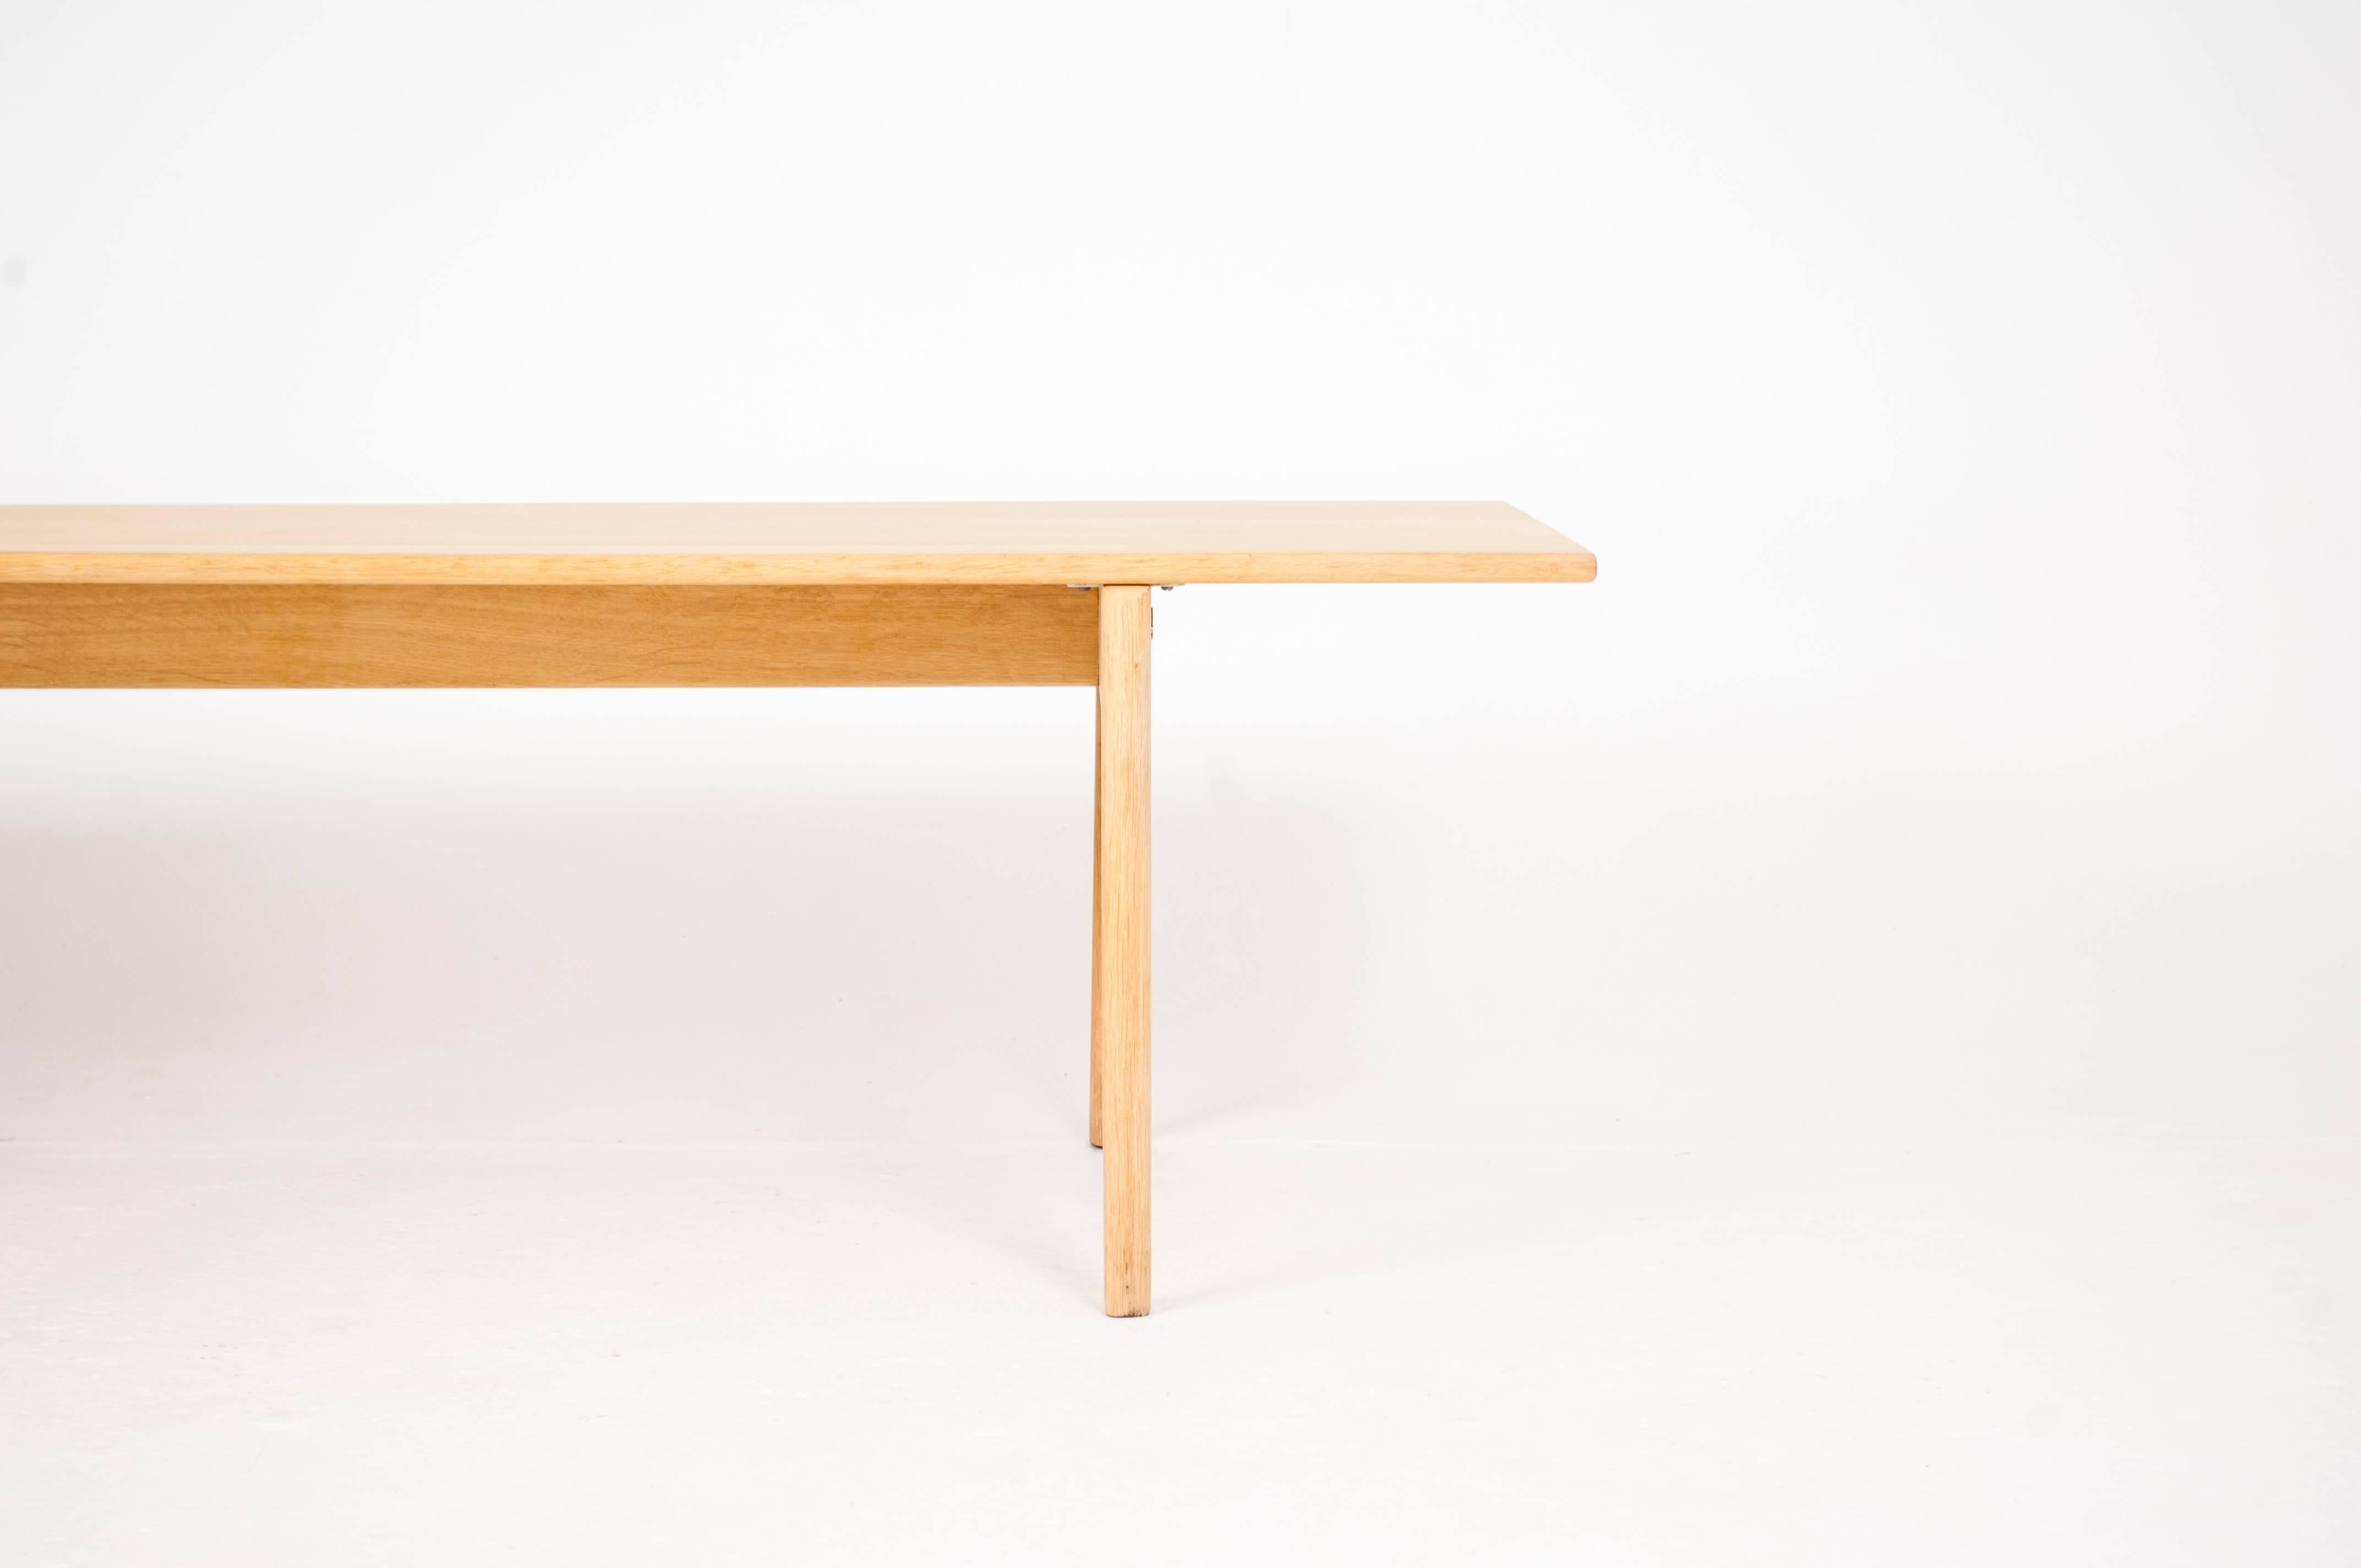 Hans J. Wegner

Rectangular solid oak coffee table. Model AT-15

Designed ca. 1964

Manufactured by Andreas Tuck.